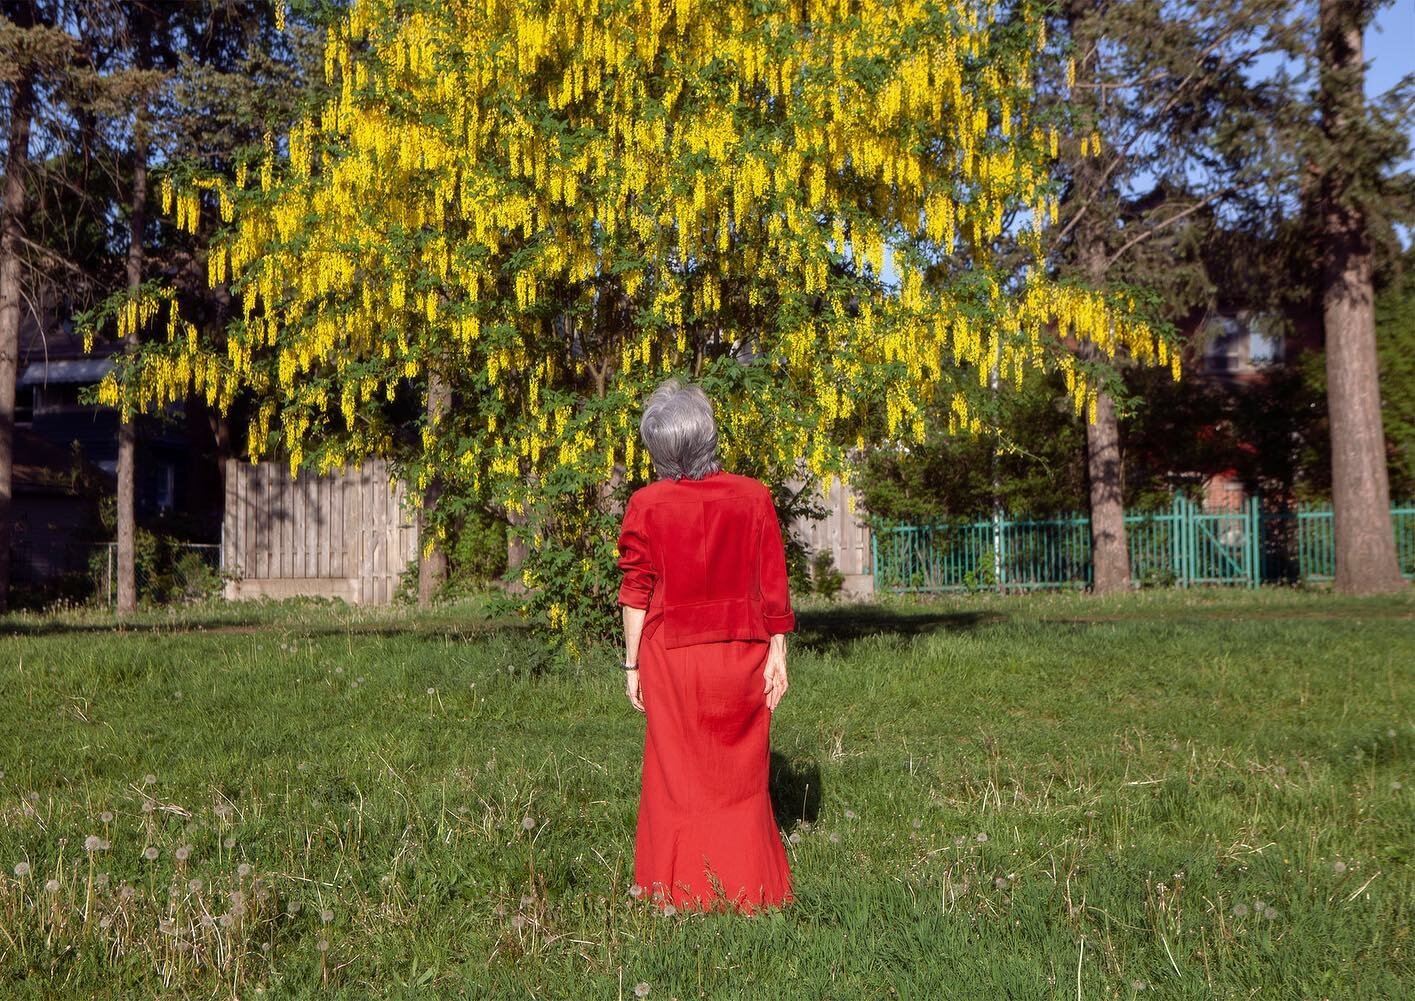 Hiii 👋 A project I&rsquo;ve worked on for the past 2 years (but actually 10) is being featured in this month's issue of The Walrus!

~

It started in my 20's, where I began to discreetly take photos of older women, just w my phone. I wasn't aware I 